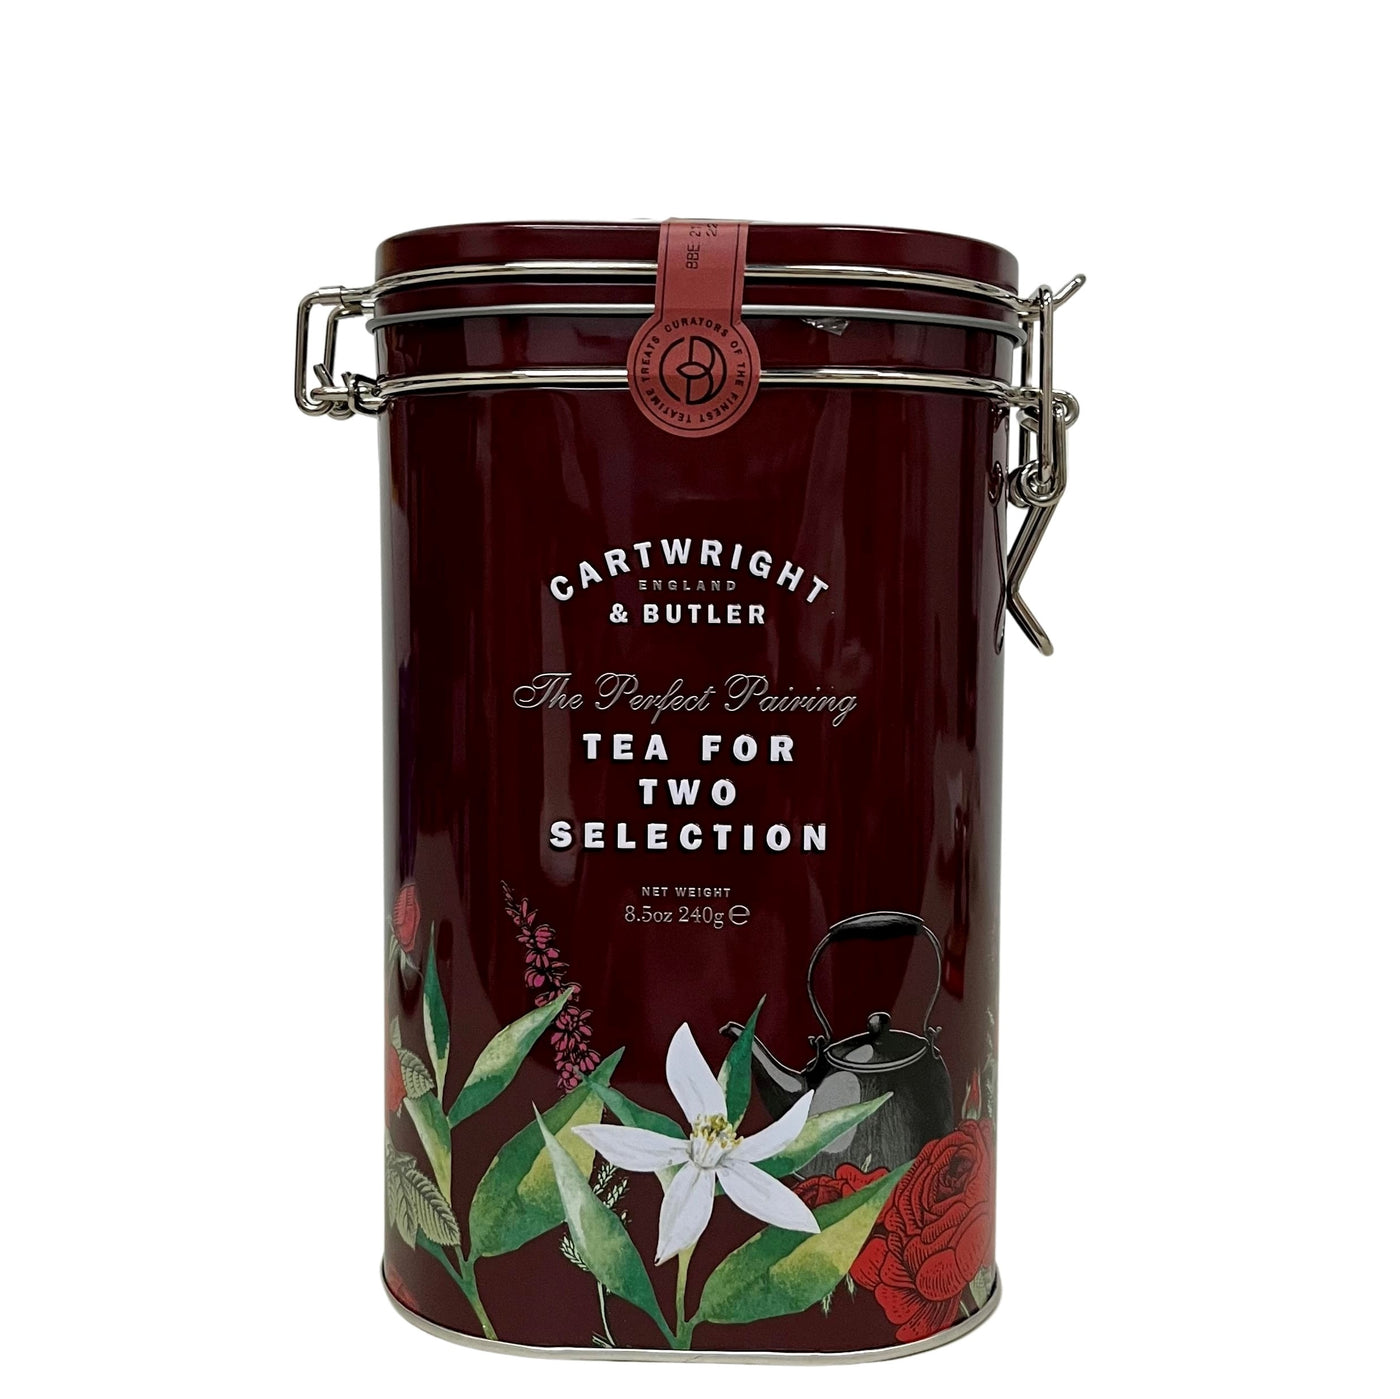 Cartwright And Butler Tea For Two Collection 240g Gourmet Grocery Ourchoice For Food Gifts